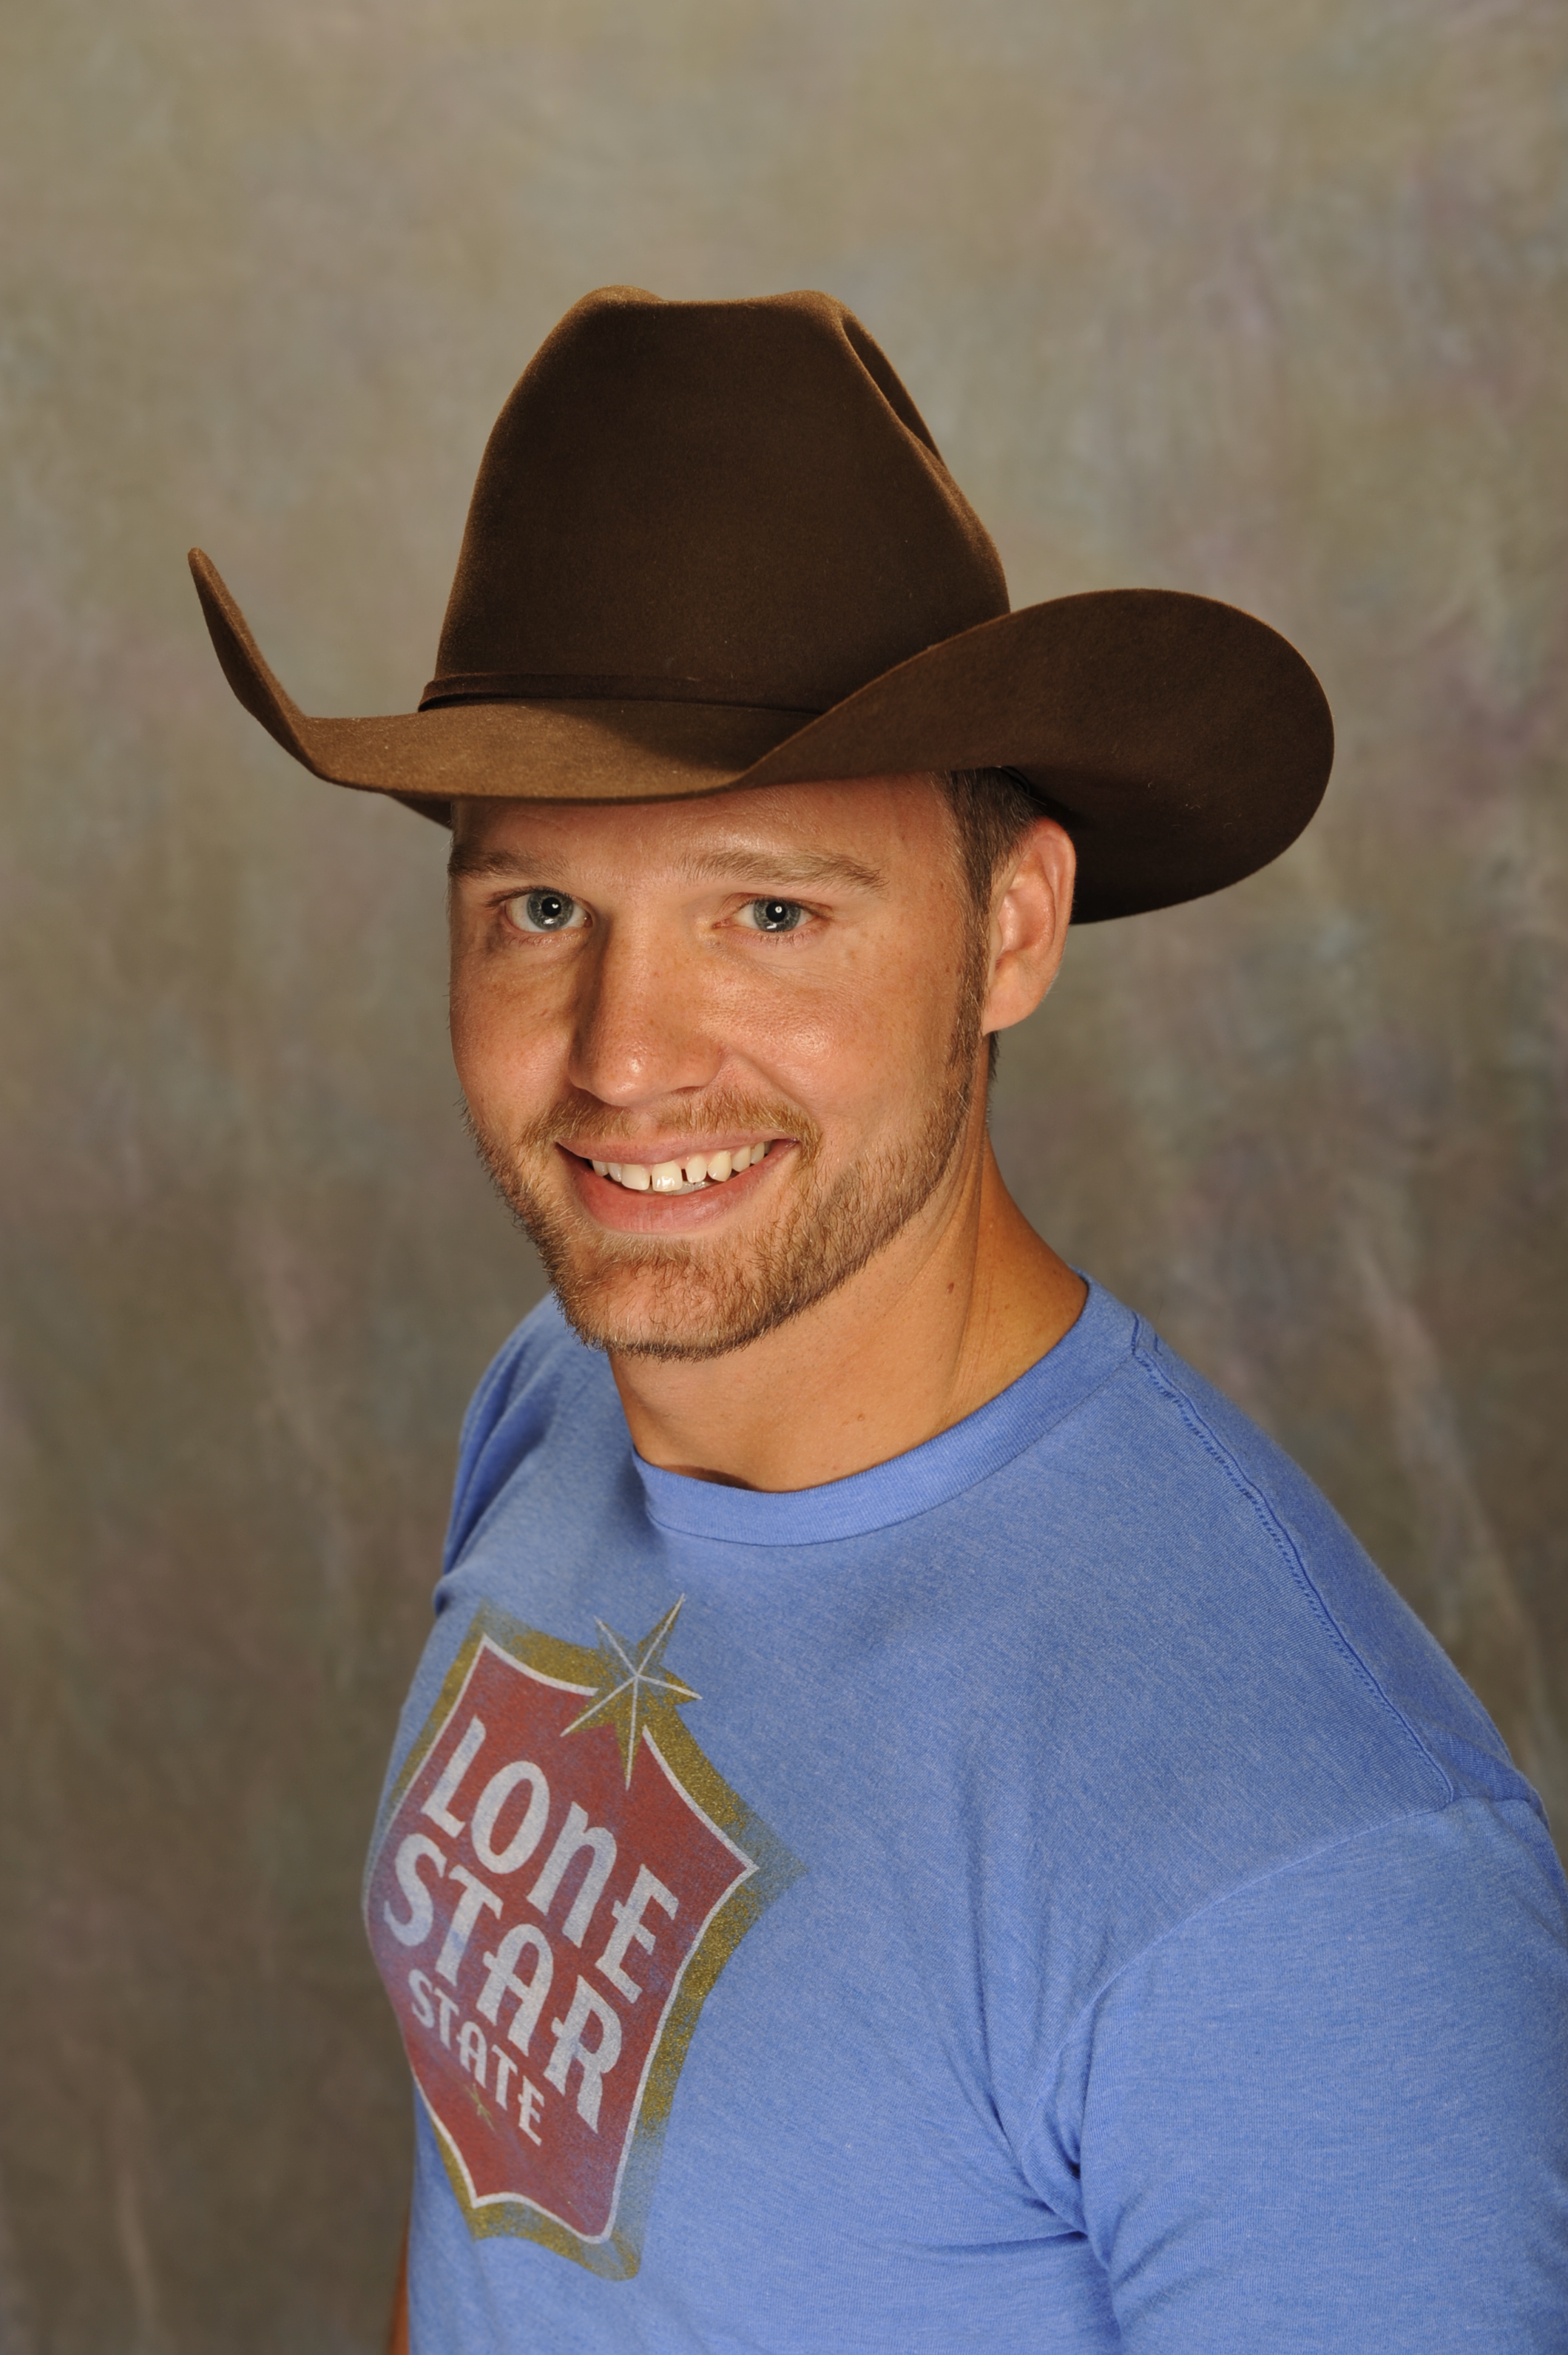 Big Brother's Steven Daigle to Ride Bulls at Gay Rodeo in San Francisco